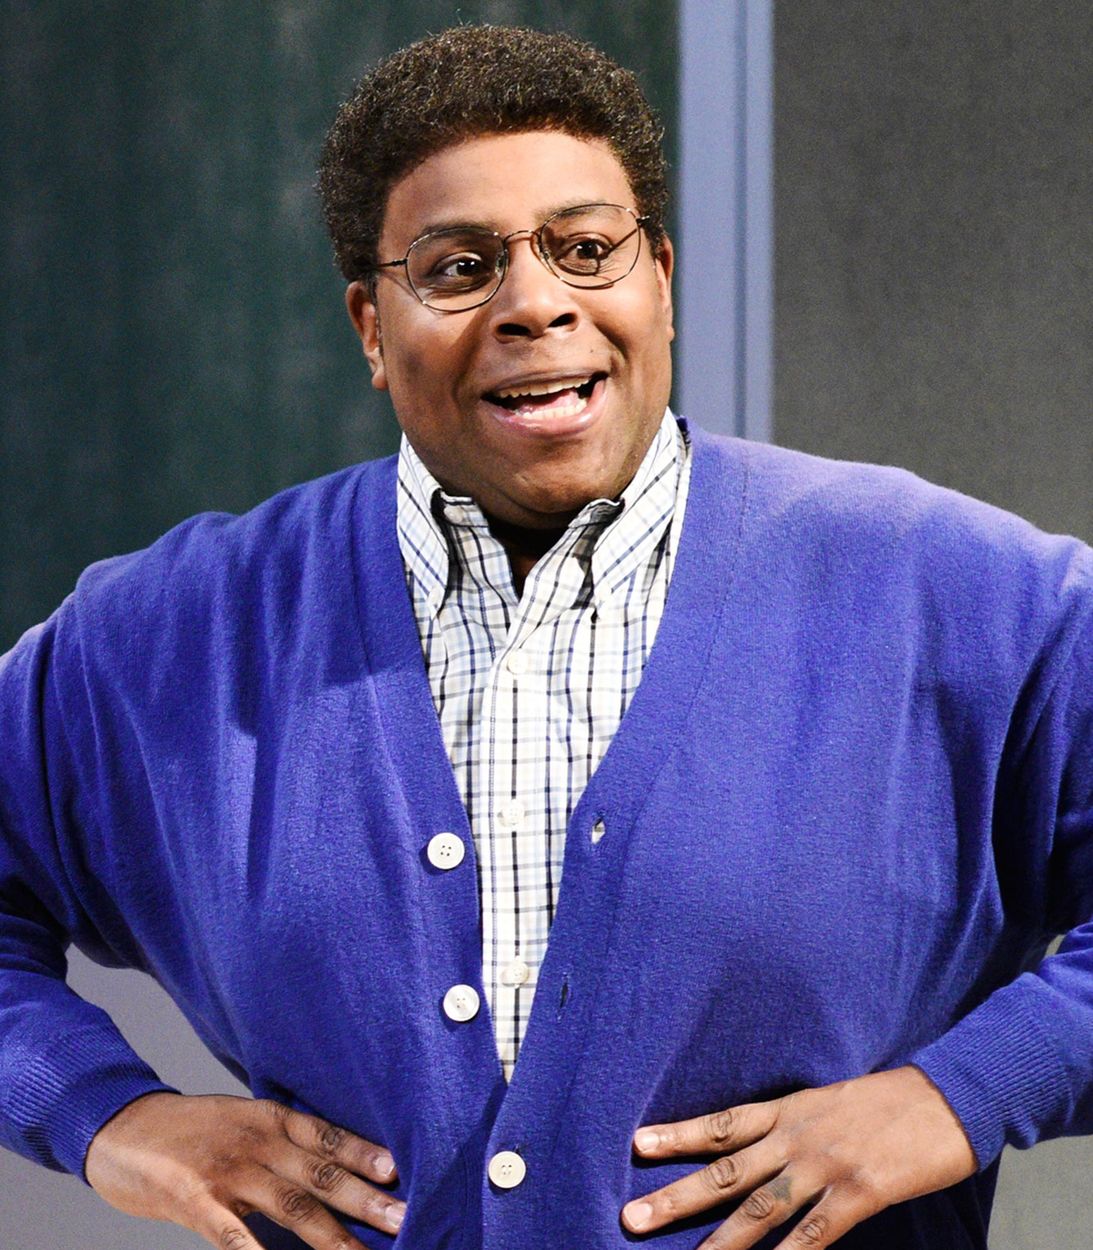 Kenan Thompson in a sweater vertical